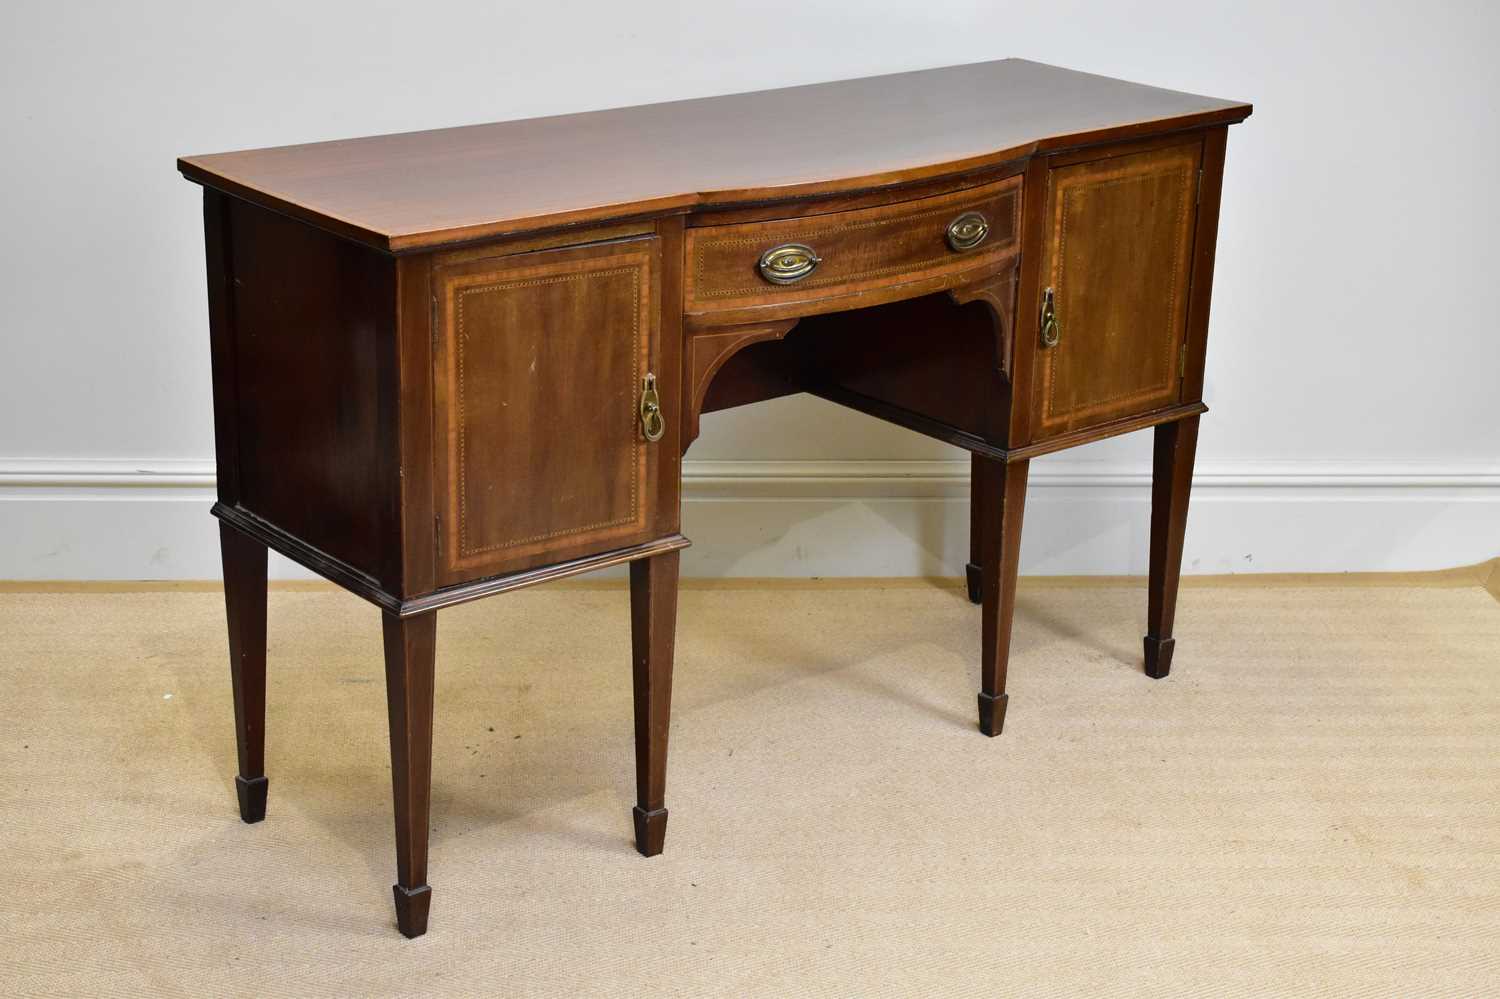 An Edwardian inlaid mahogany Sheraton Revival sideboard, with single drawer flanked by two